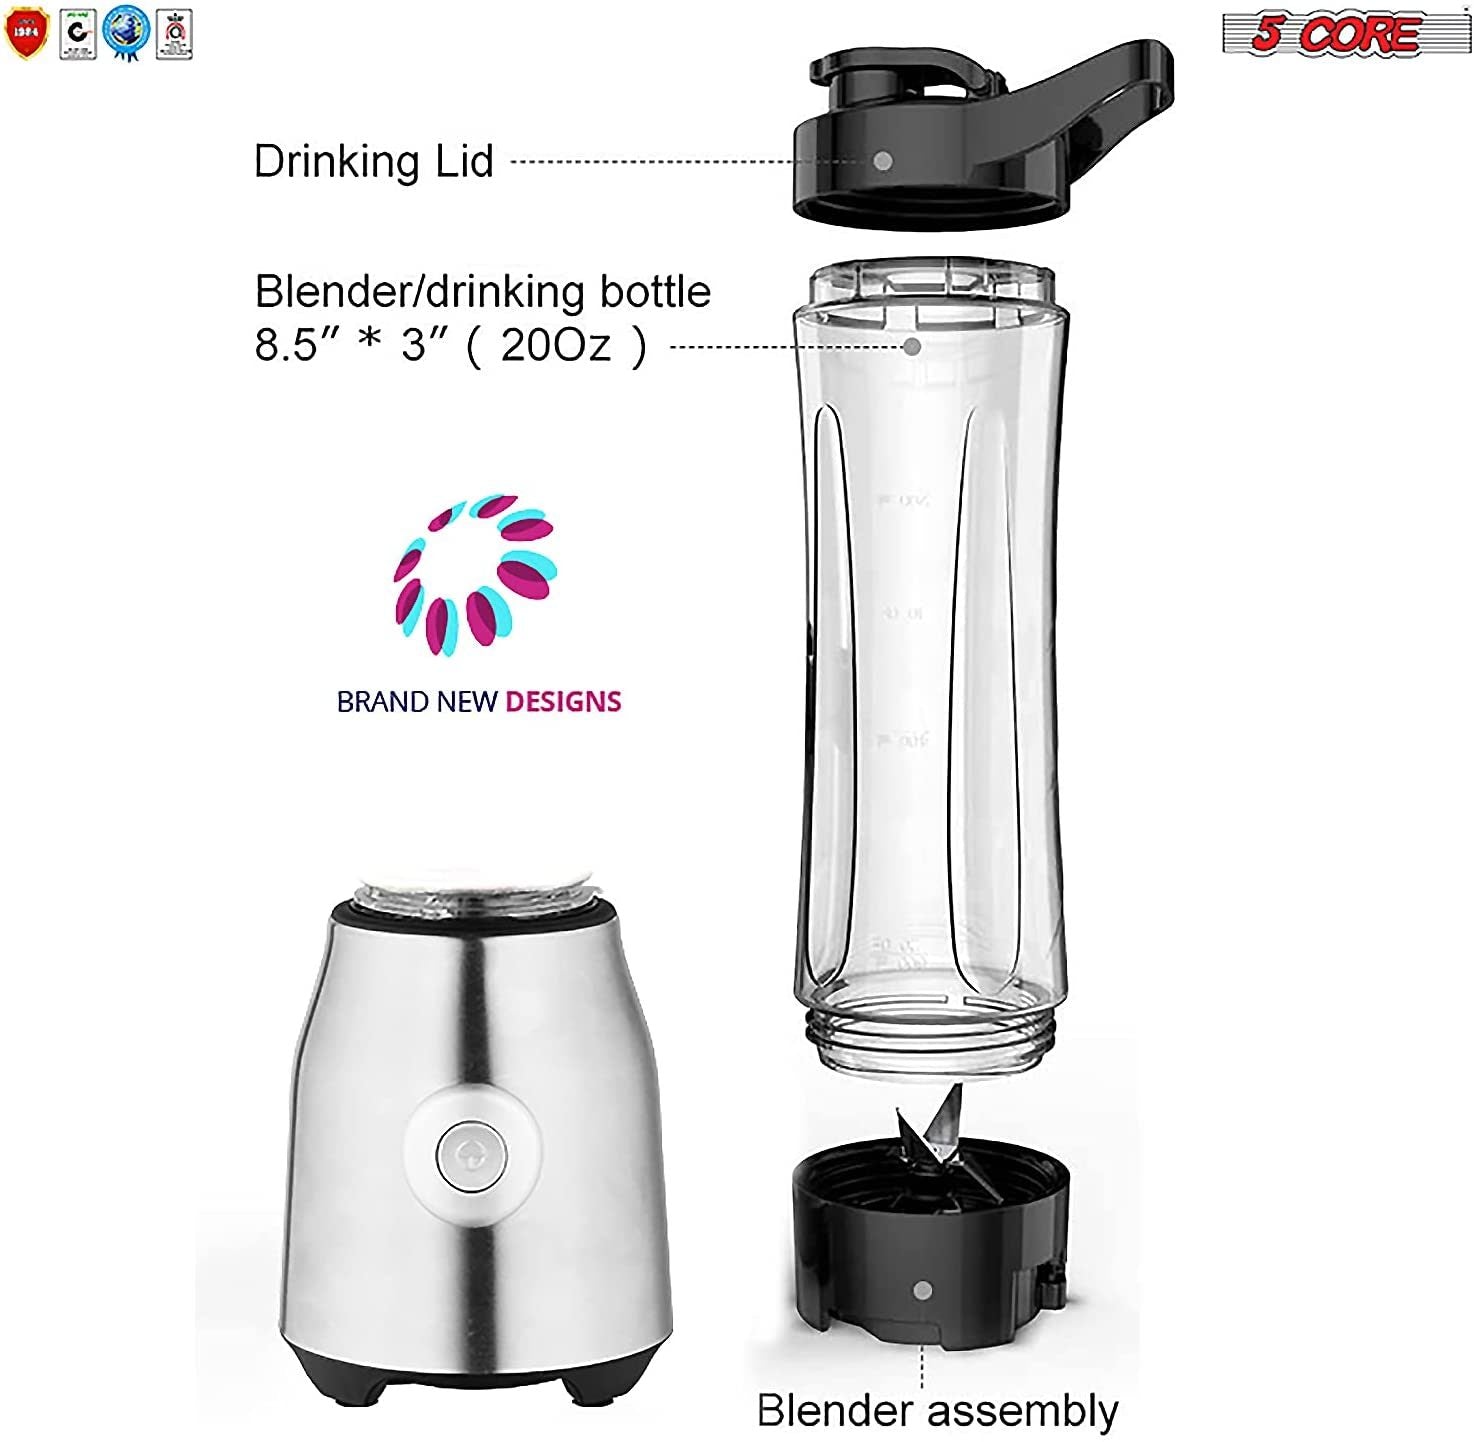 professional electric blender factory sale